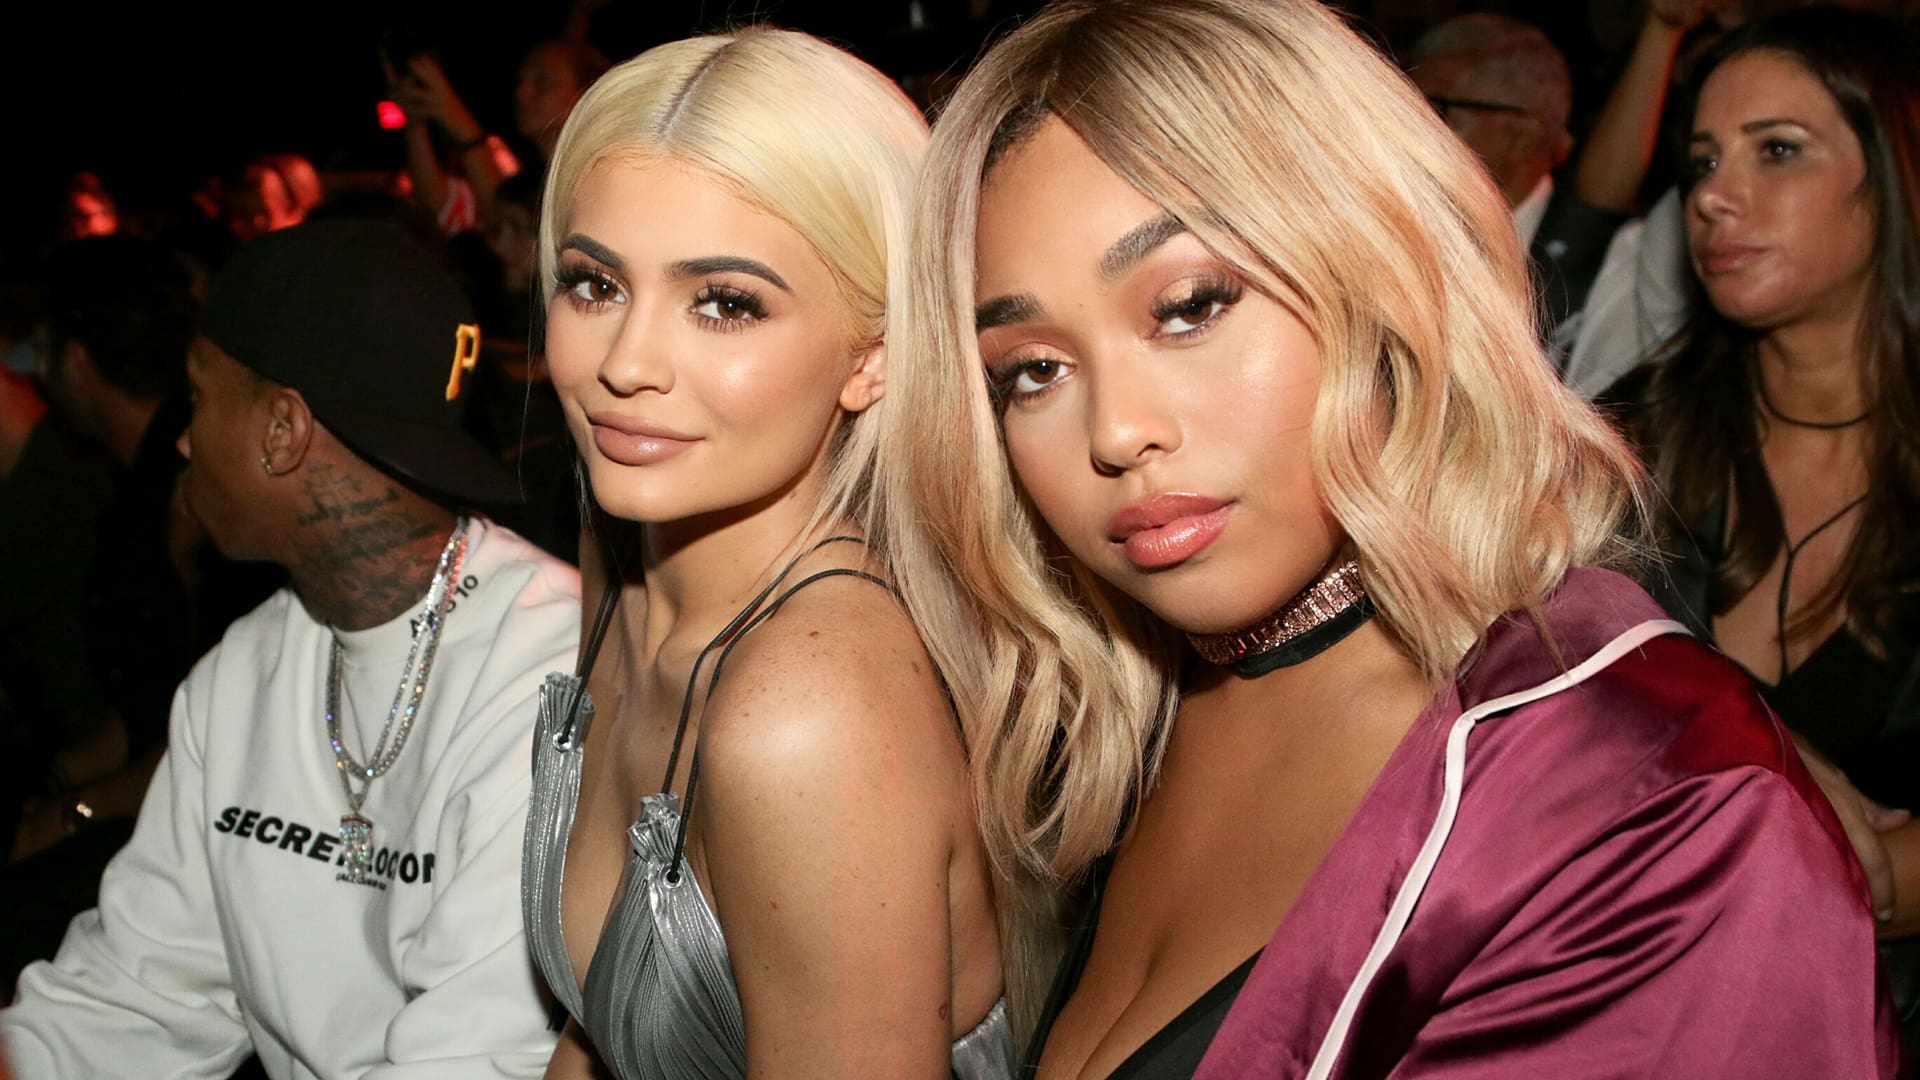 Megan Thee Stallion Continues To Admire Jordyn Woods While Fans Debate Whether She Owes Her Fame To Kylie Jenner Or Not